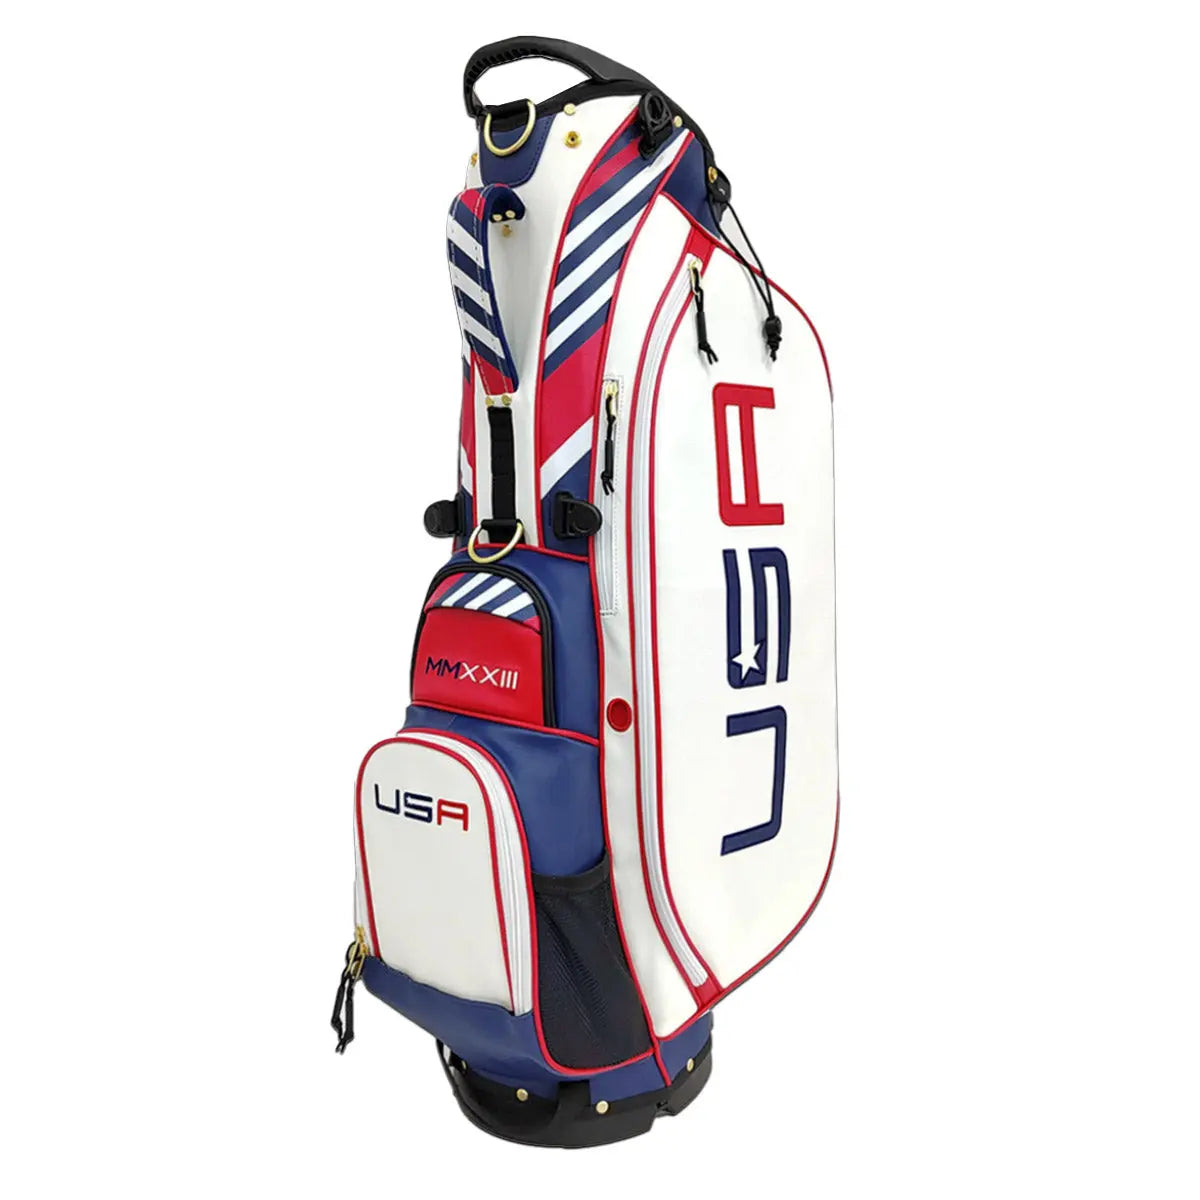 $102 Ryder cup golf bag (before tax)